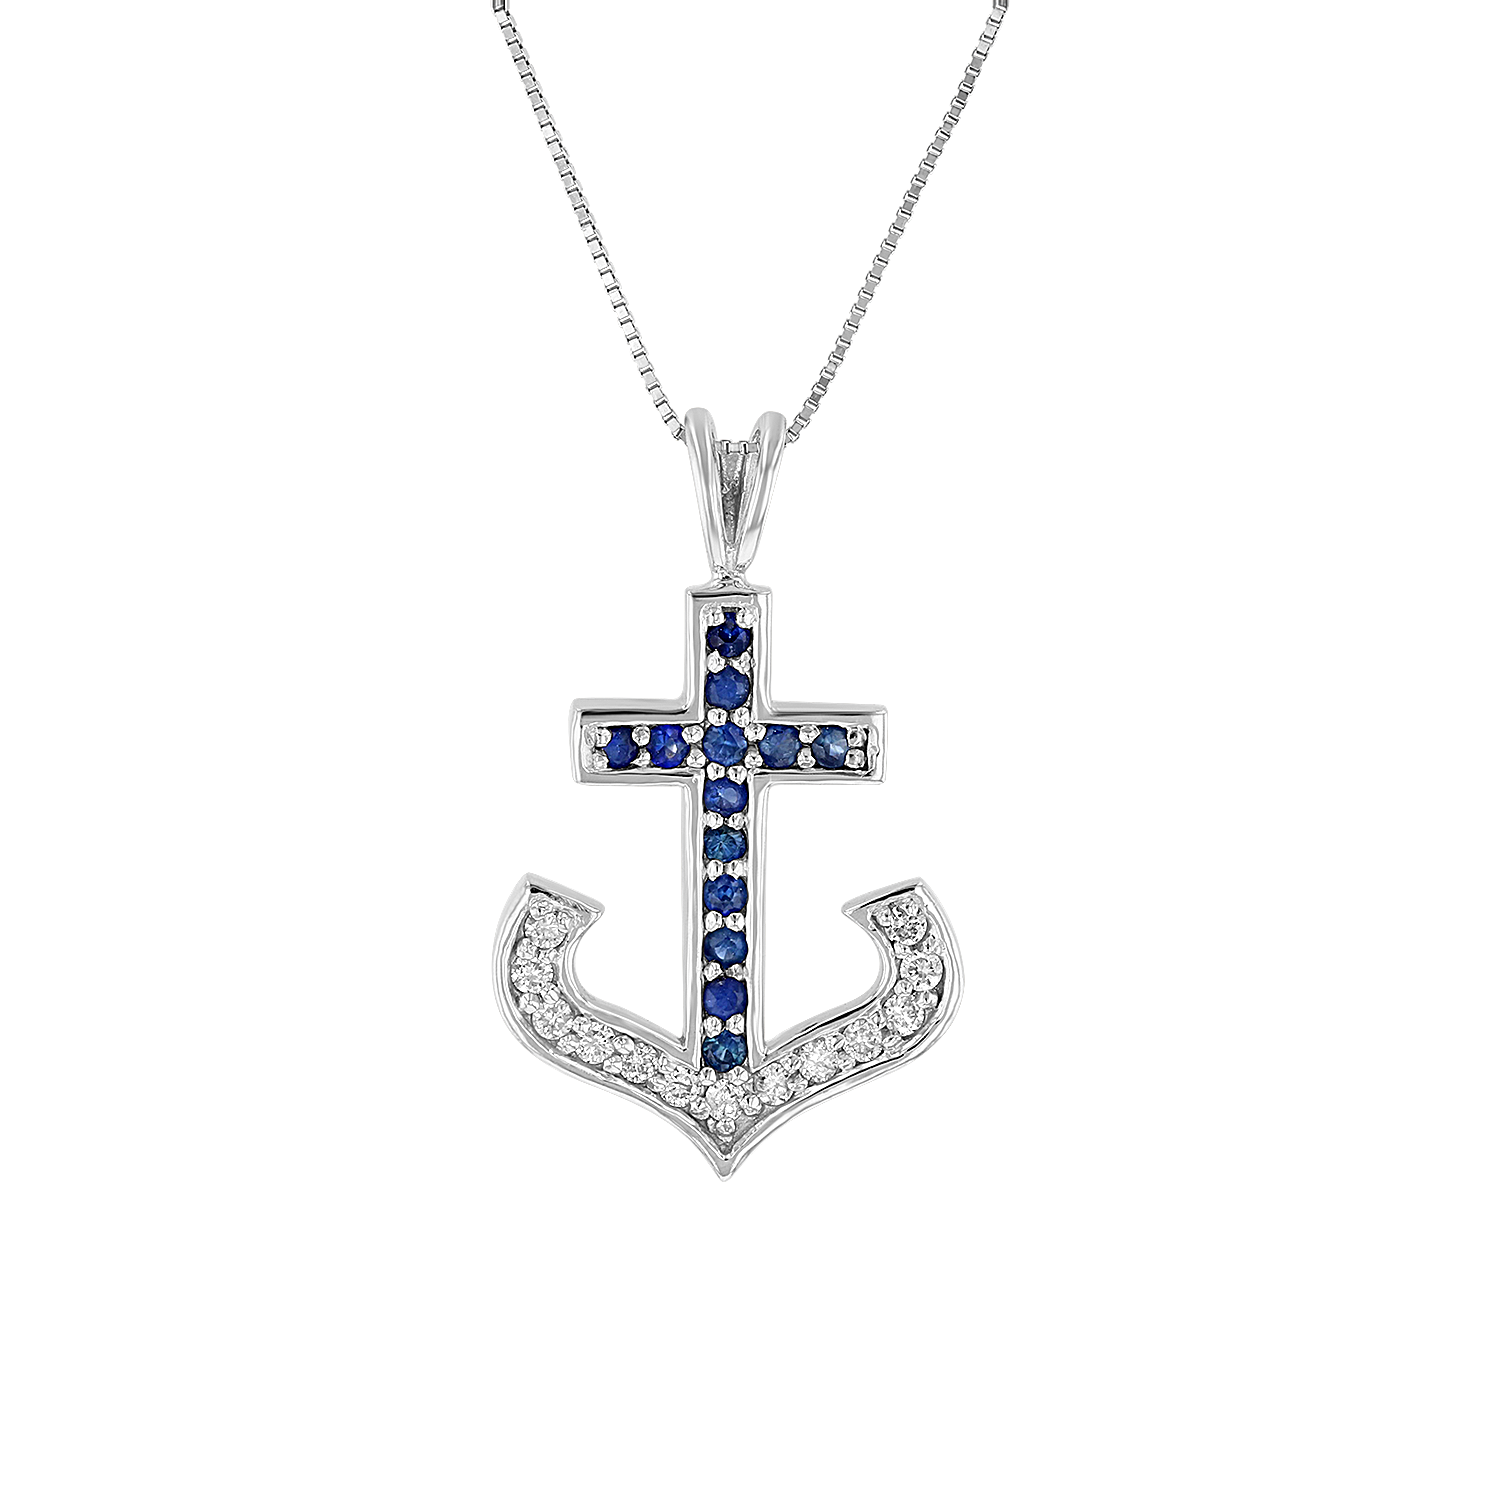 View 1/2ctw Diamond and Sapphire Anchor Pendant in 14k White Gold